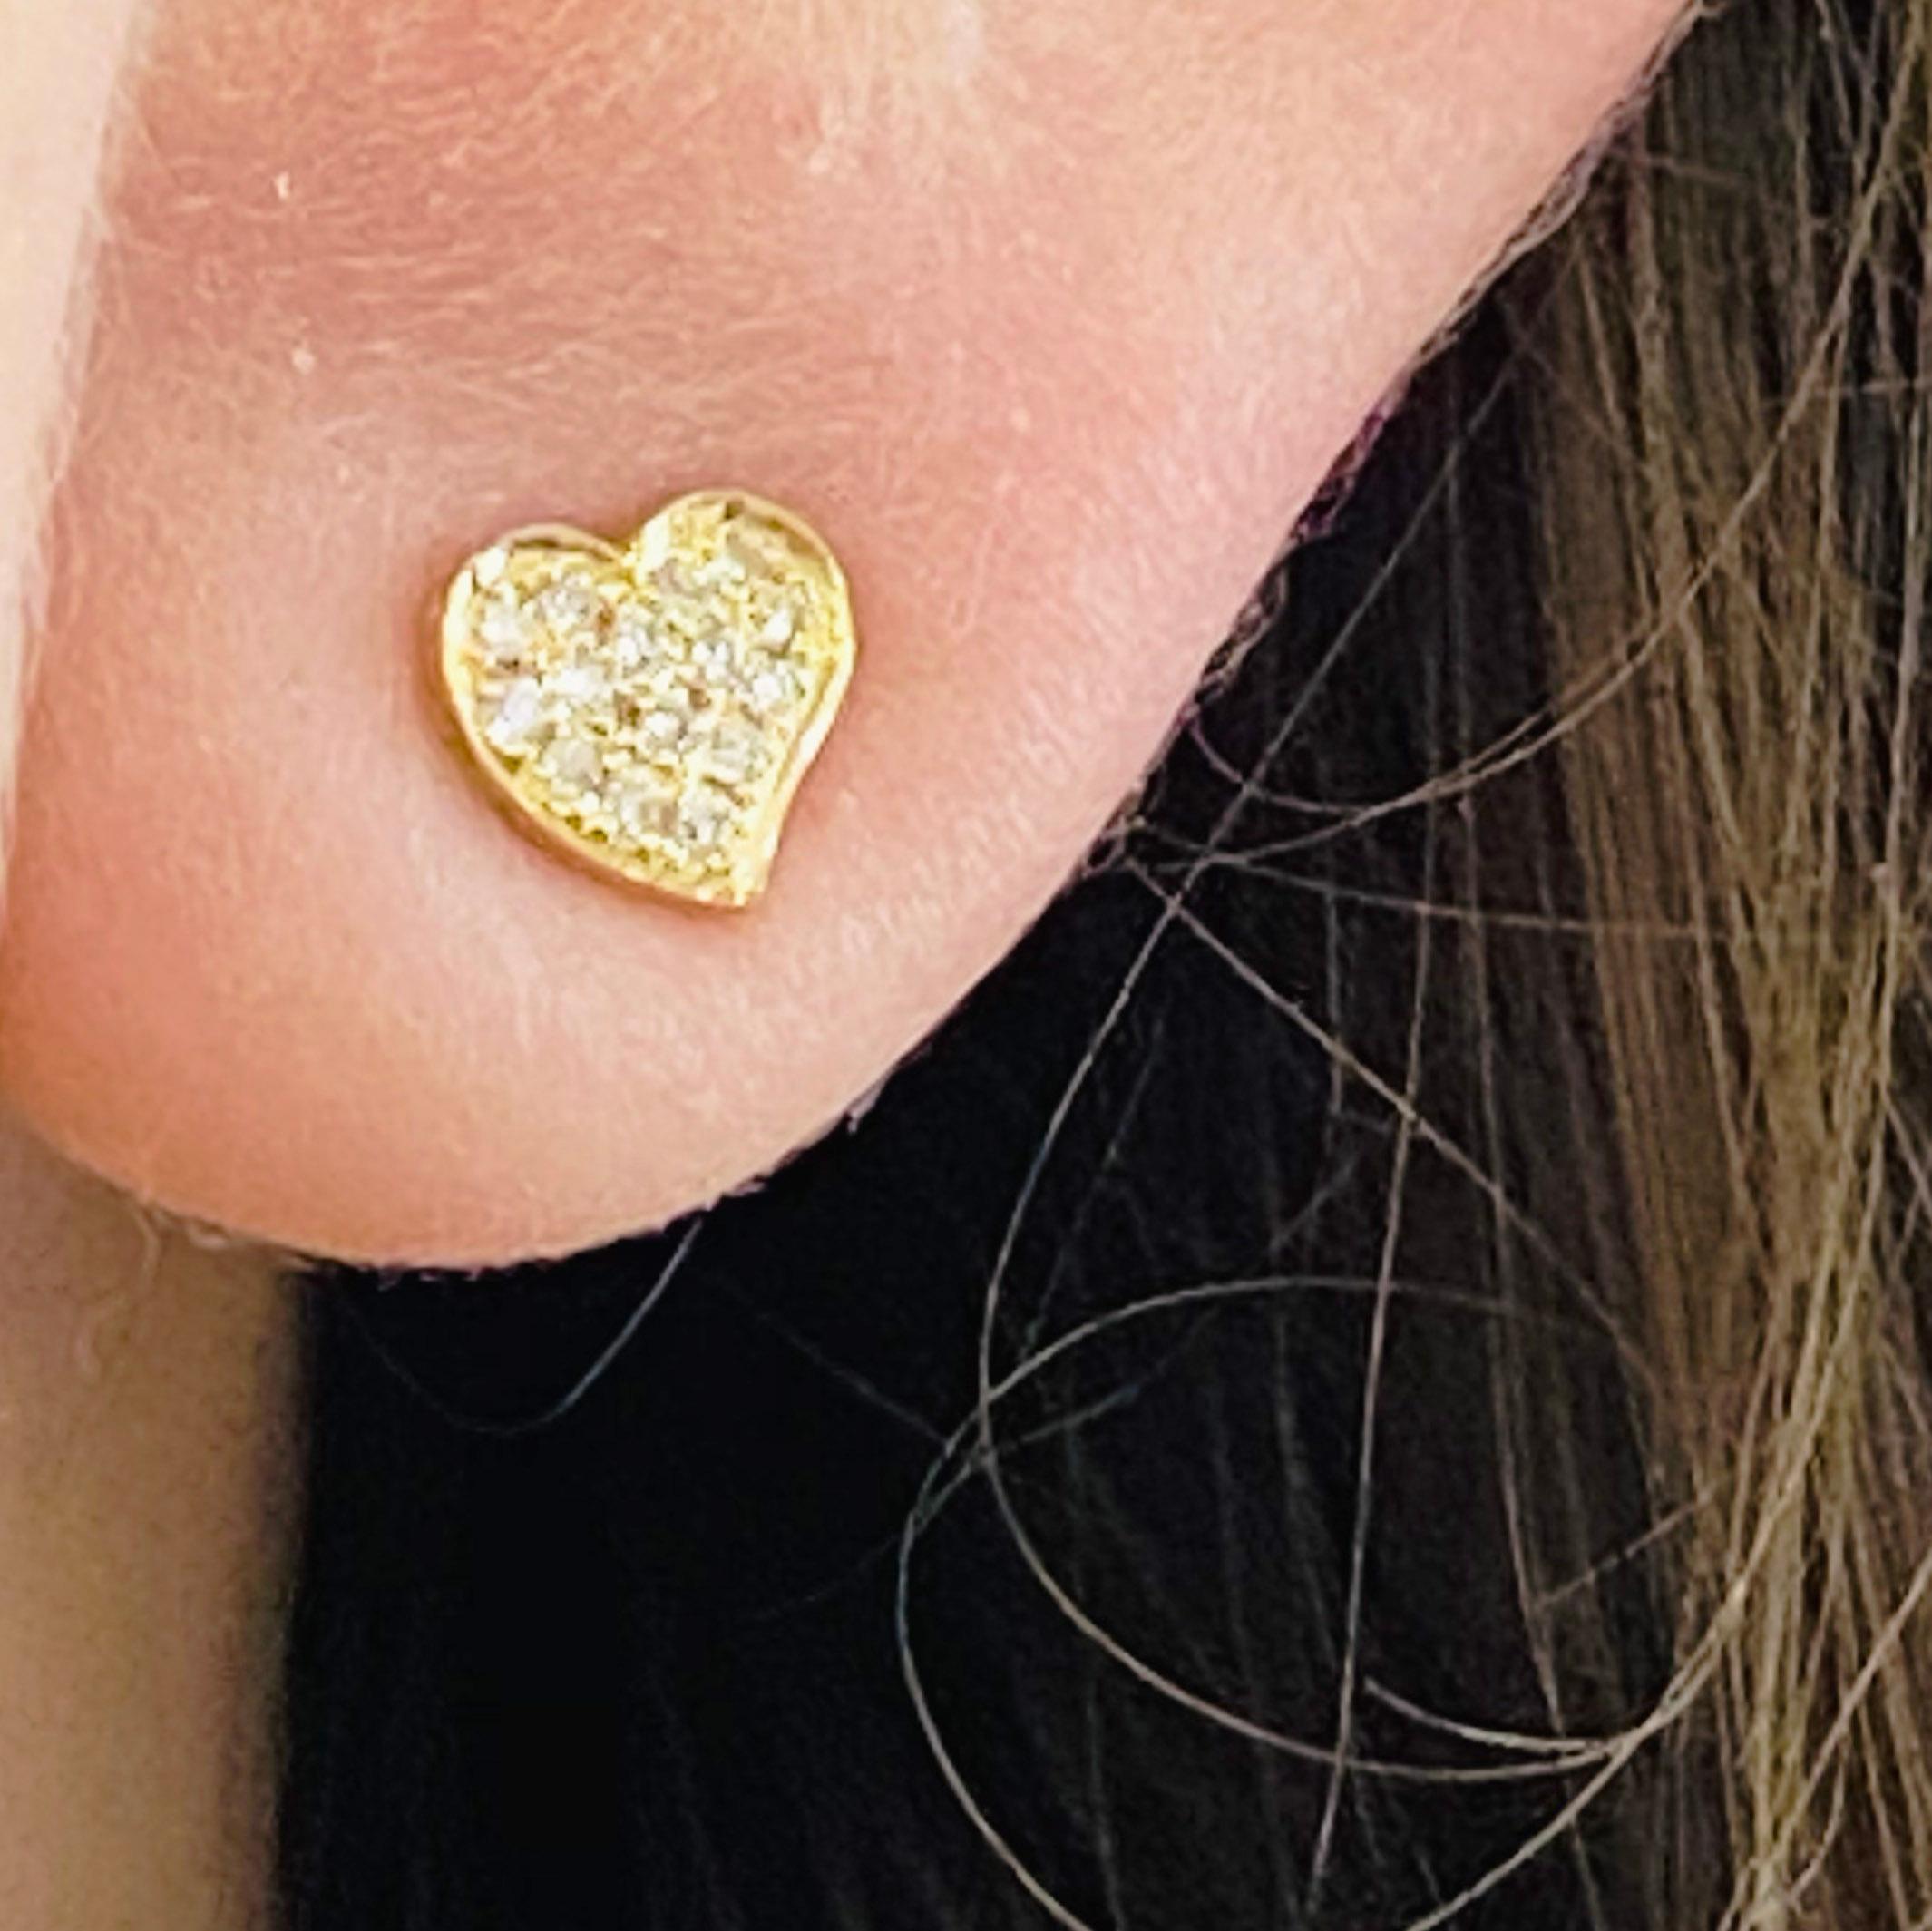 These sweet little heart studs look great on any ear, adding a touch of whimsy and sweet charm. Pave diamond studs are both trendy and classic. These diamond heart earrings are a great staple to add to your collection, or to your loved one's